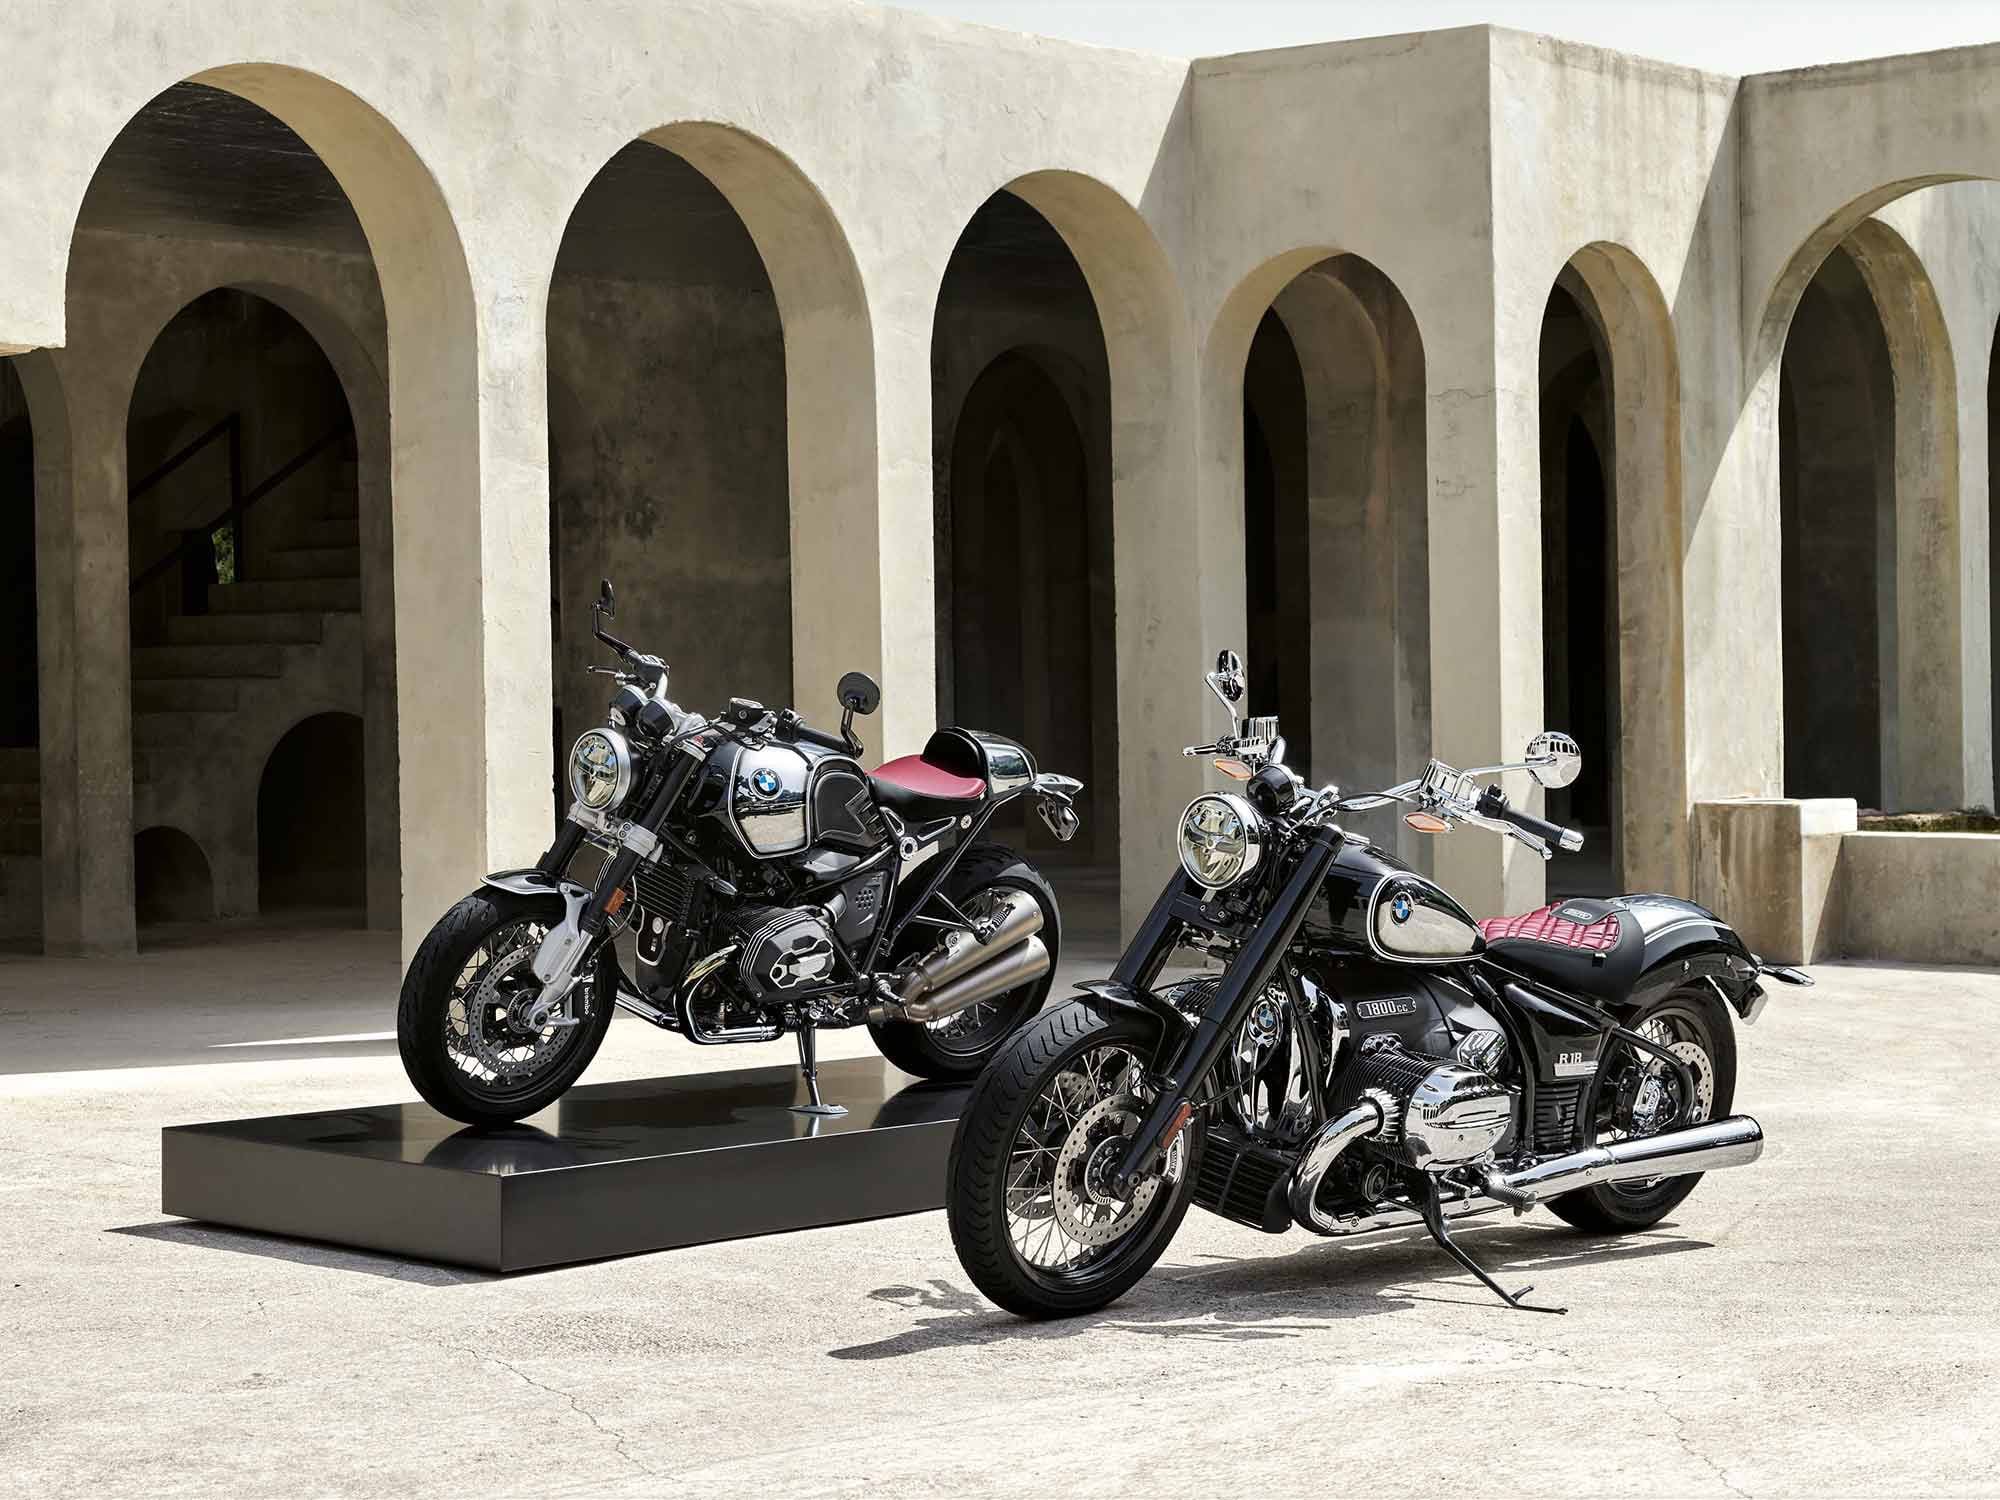 BMW Motorrad introduced two models celebrating 100 years since the brand’s first motorcycle.